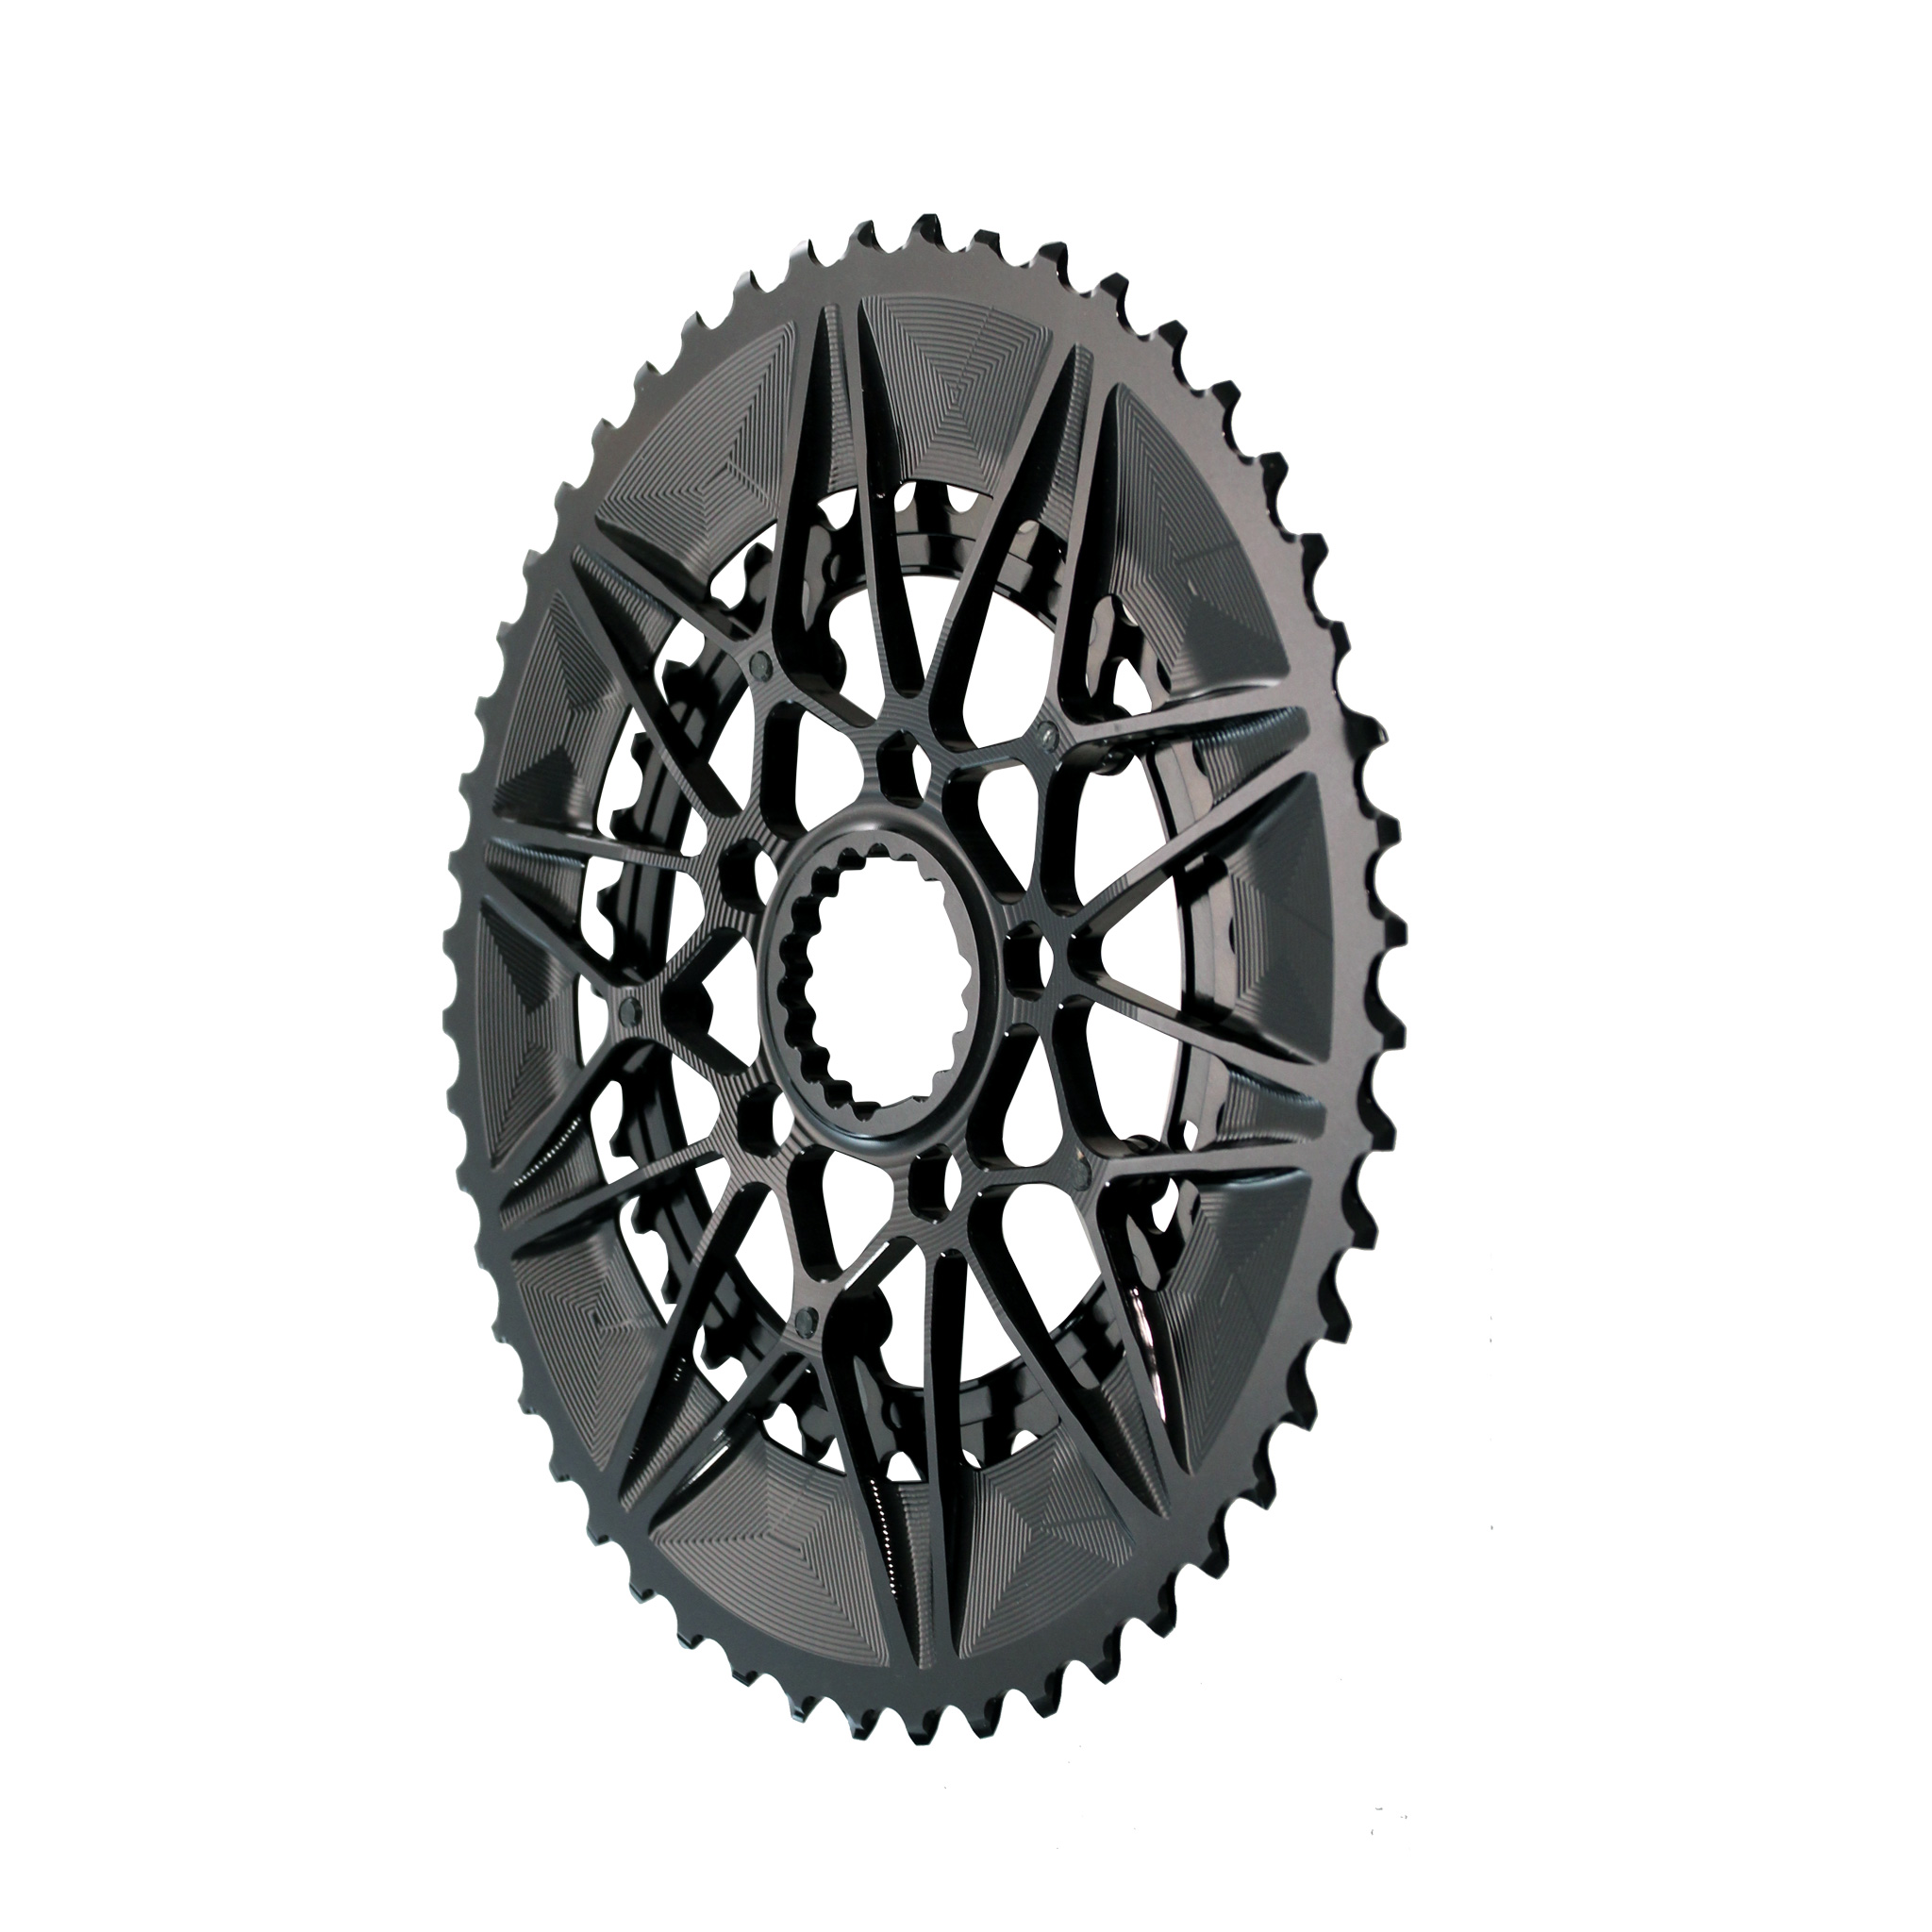 Absolute Black Oval SpideRing Cannondale Road Chainring Set,  50/34T